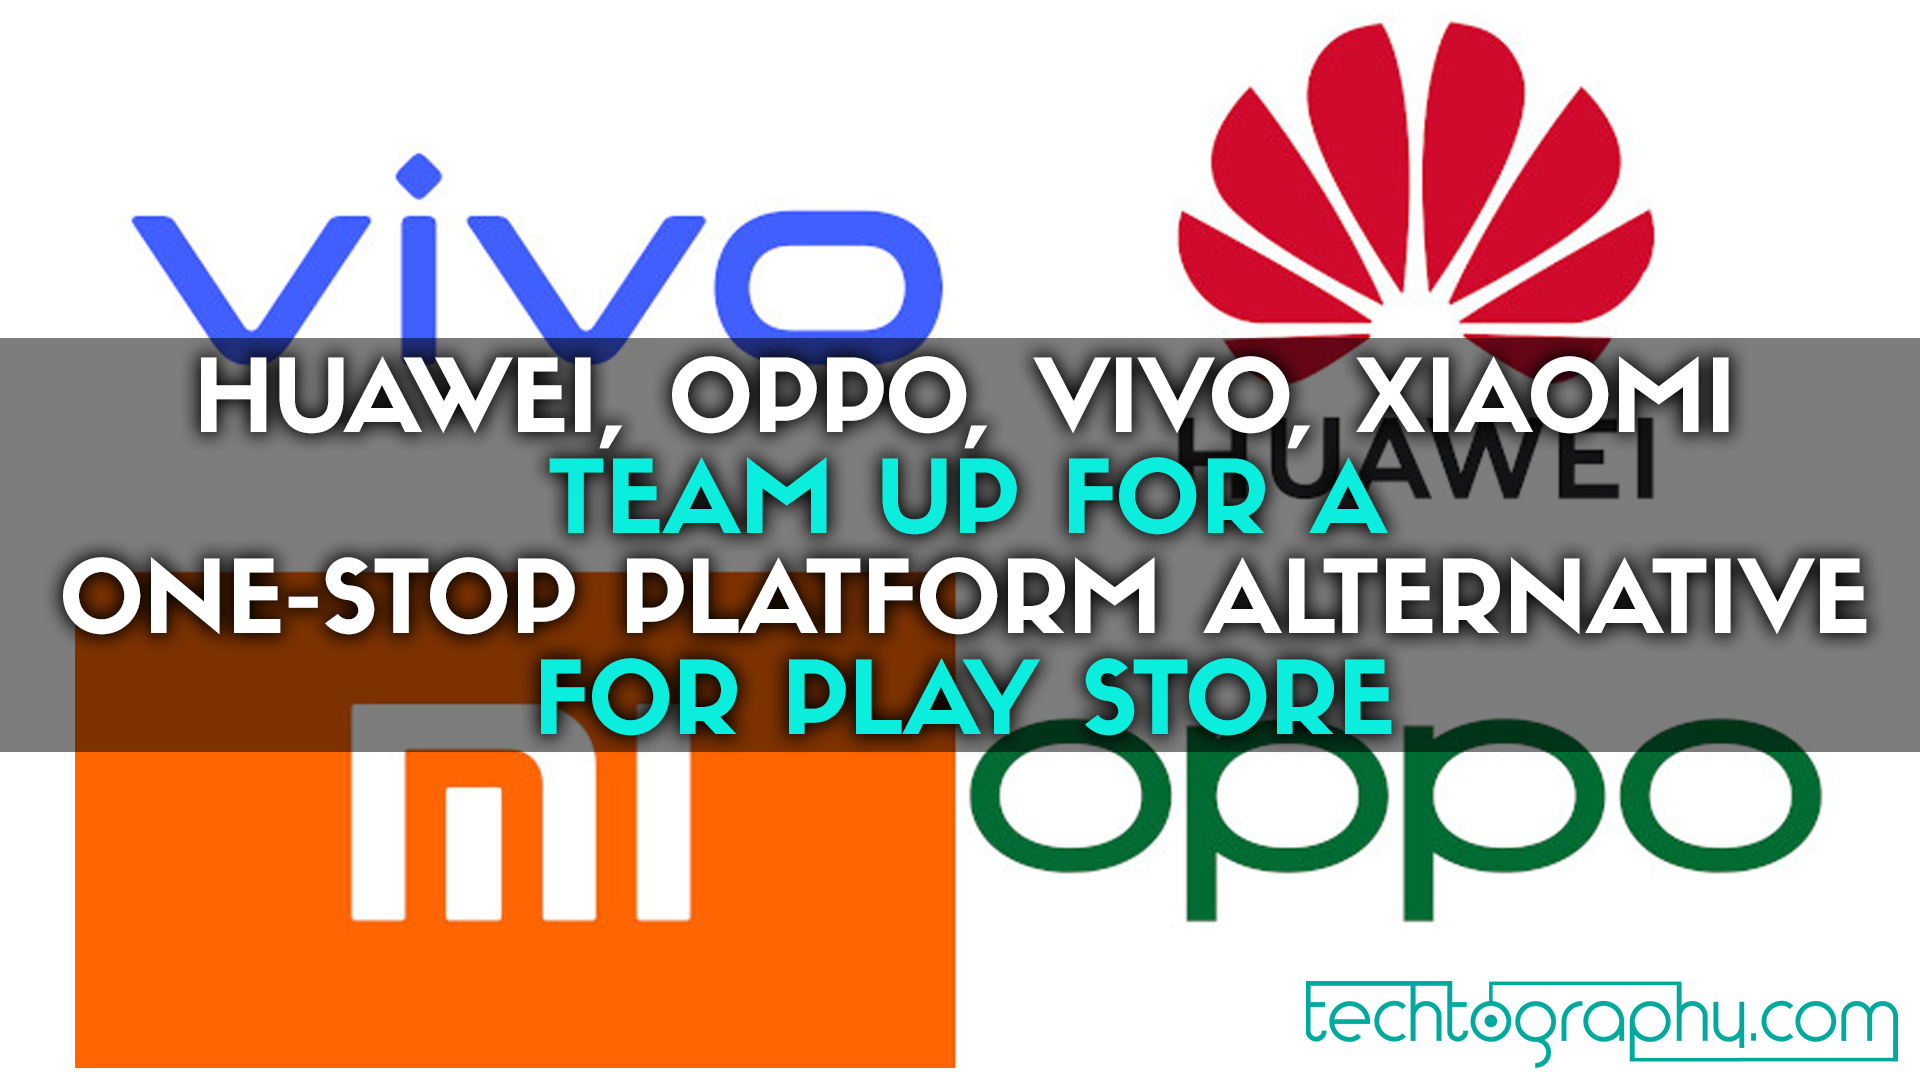 Huawei, Oppo, Vivo, Xiaomi team up a one-stop platform alternative for Play Store